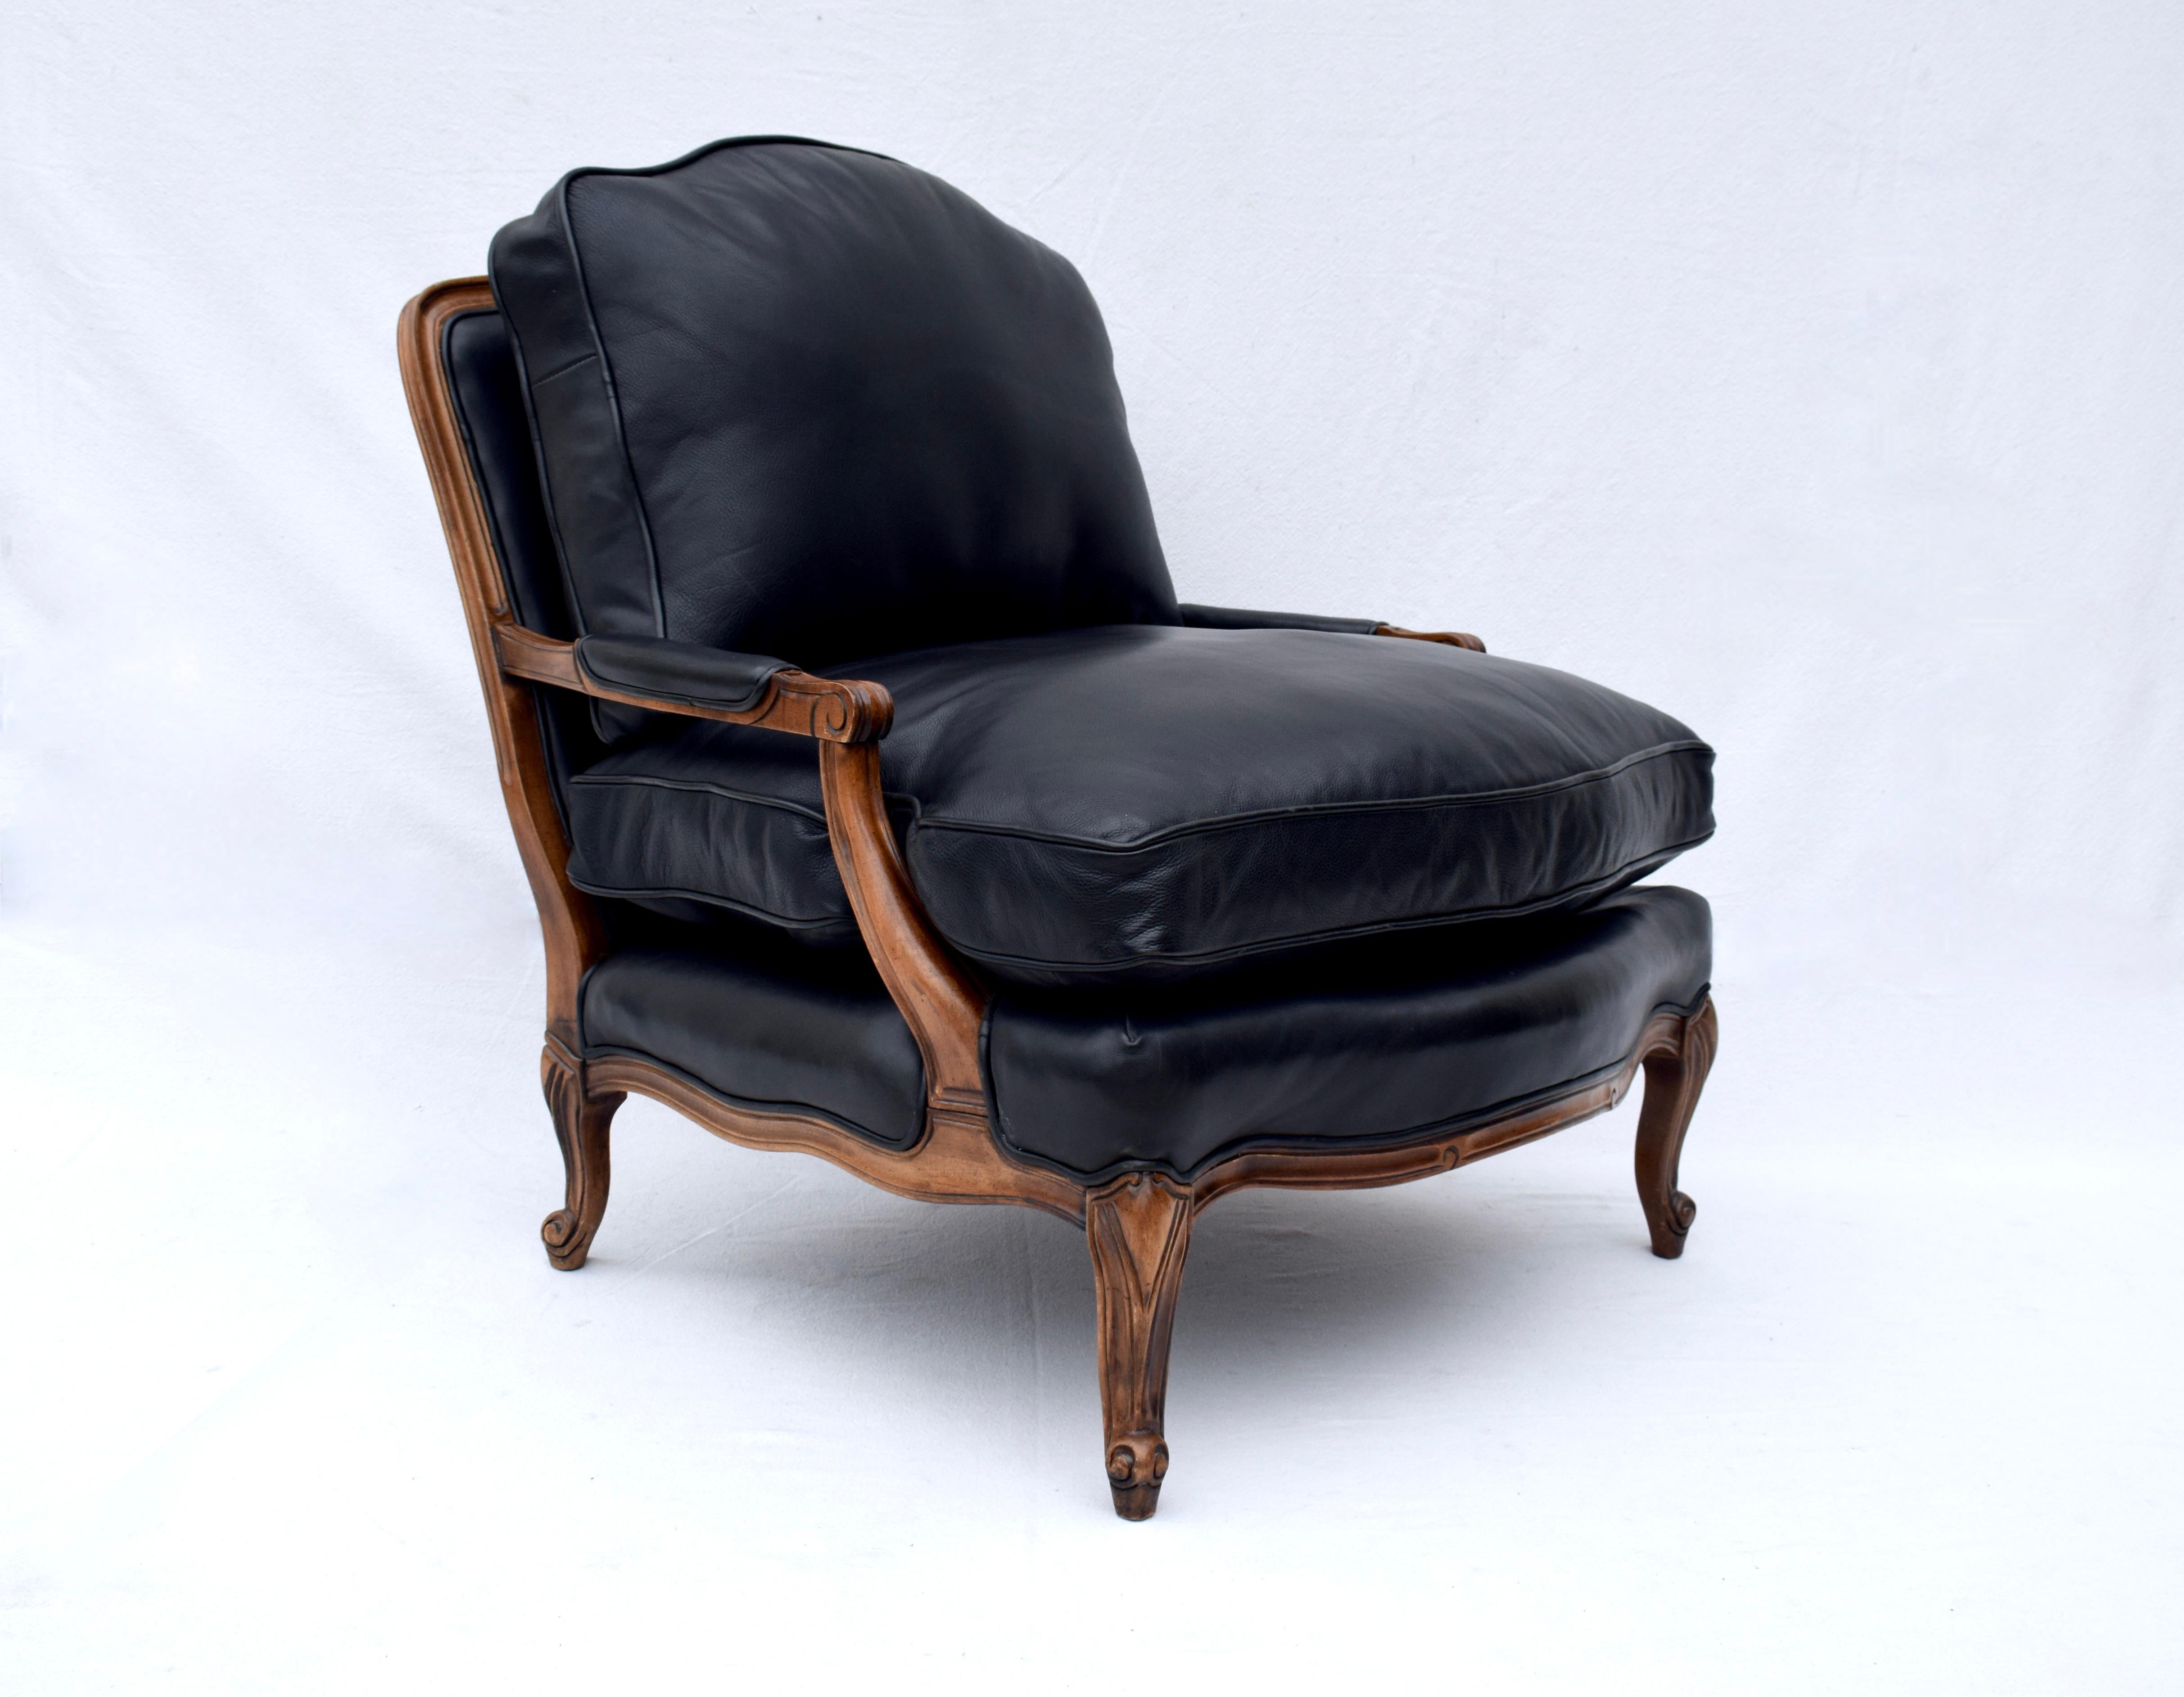 black leather chair and ottoman